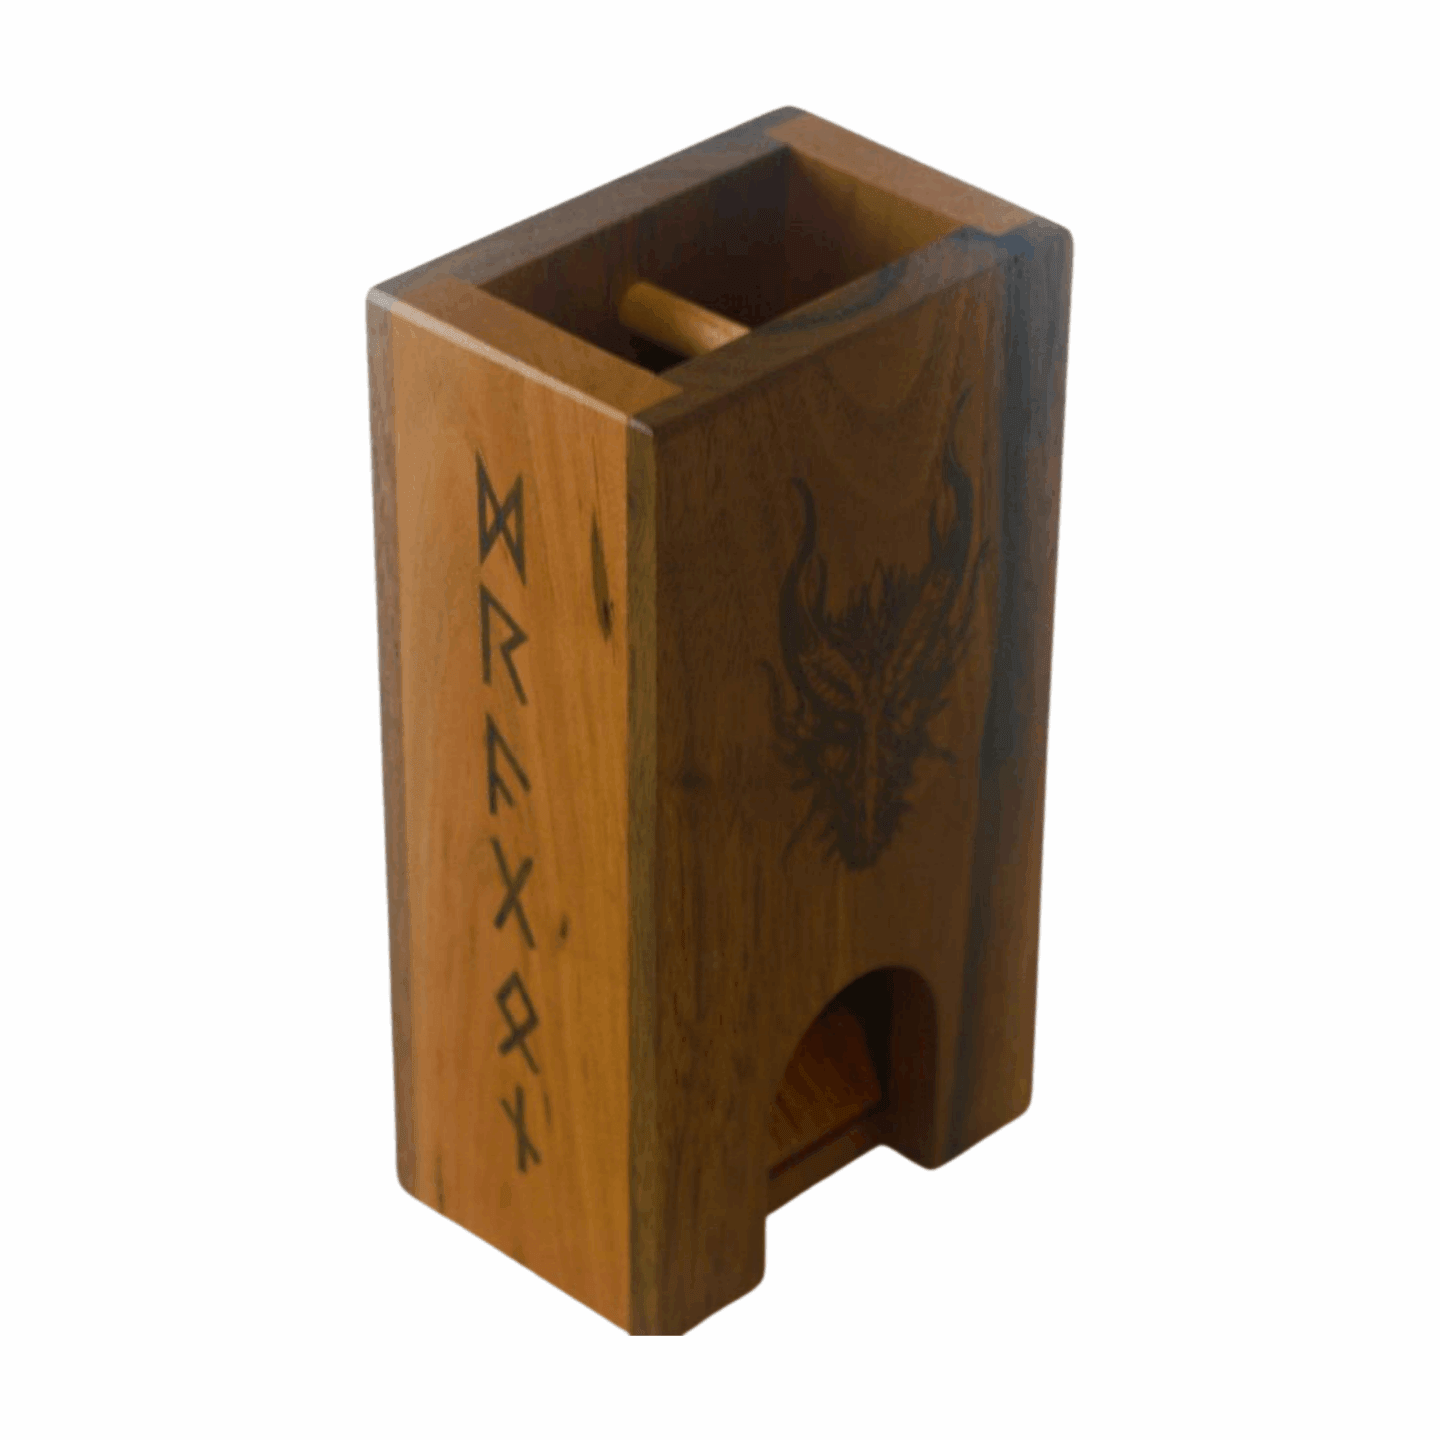 Small Walnut and Cherry Dice Tower with Dragon and Runes - Dragon Armor Games